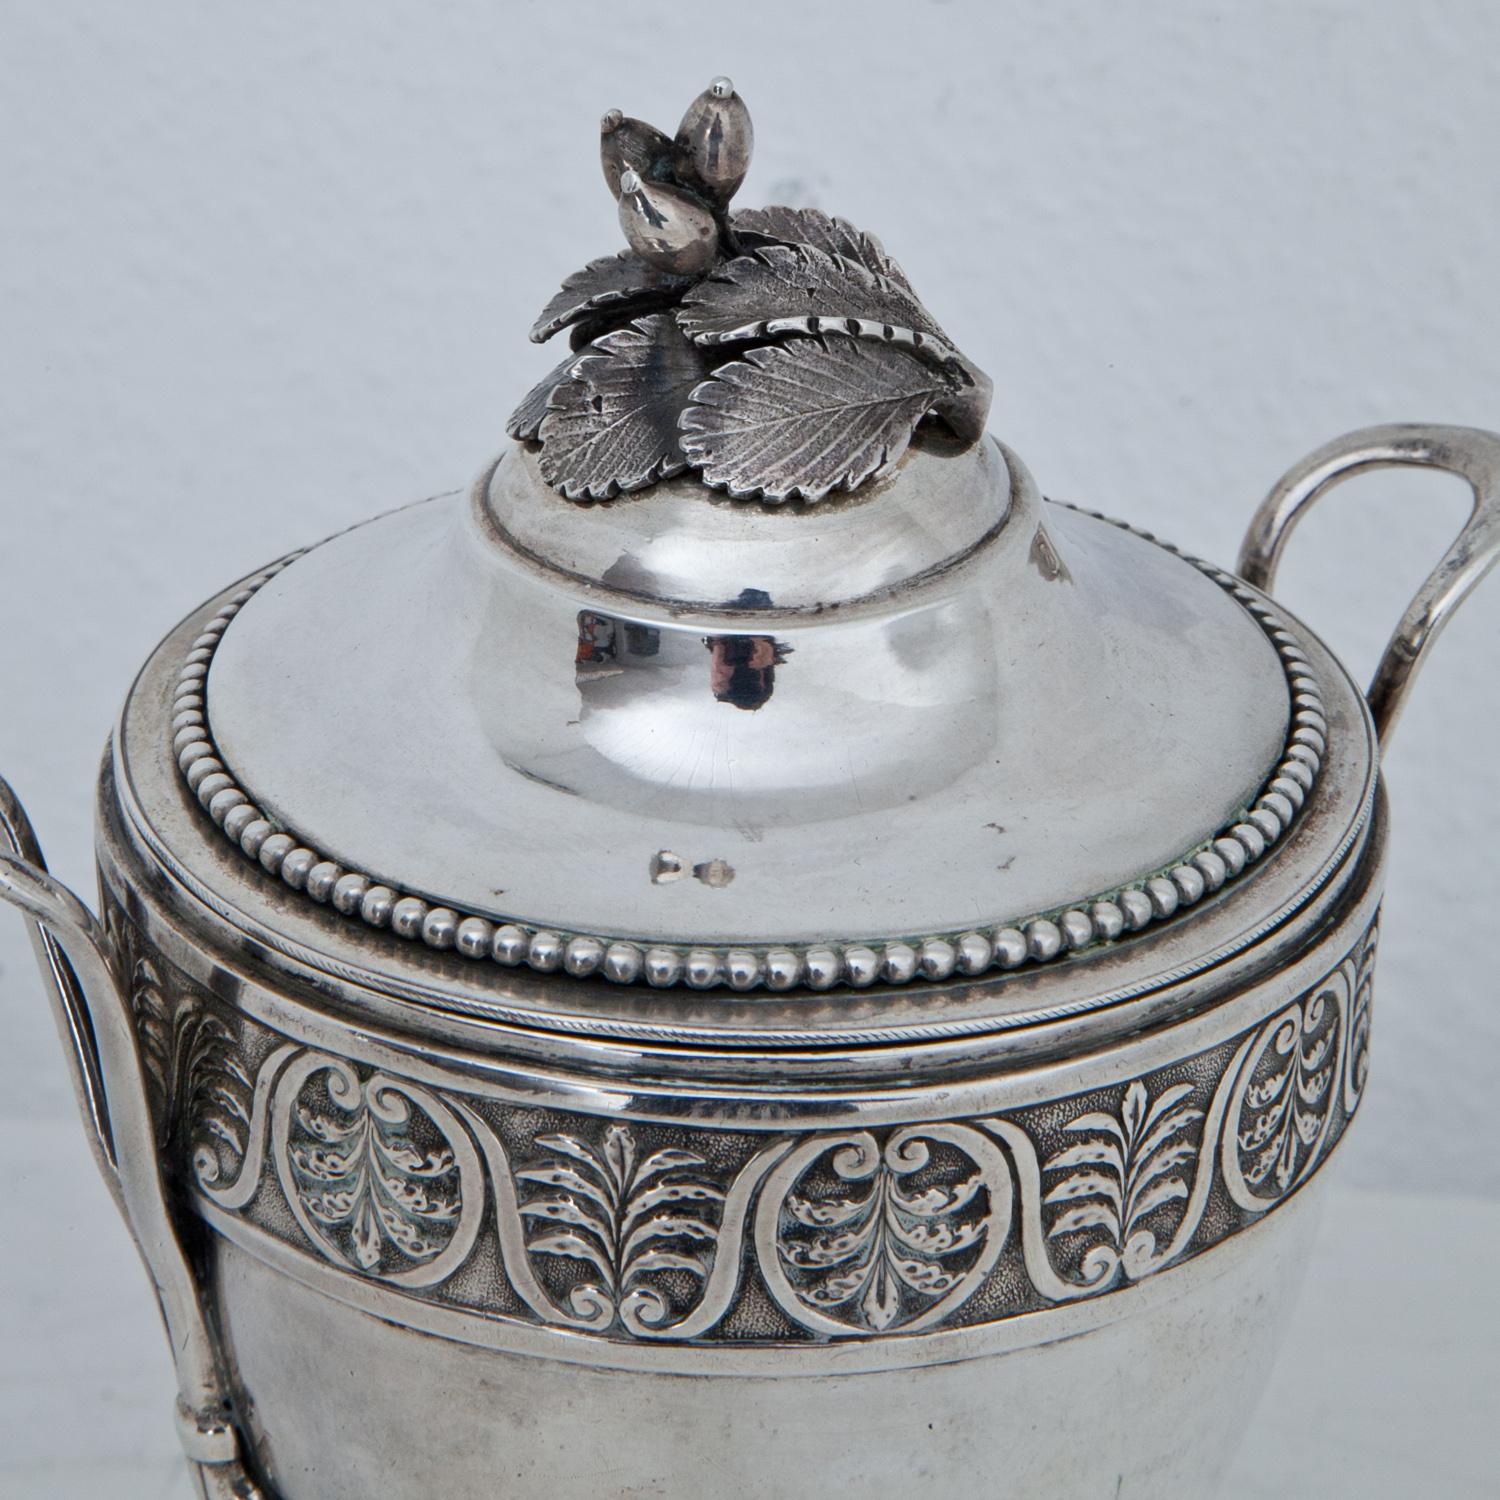 Silver lidded goblet (721g) on a round foot with bead molding and a conical wall, decorated with a palmette frieze and thin handles. The lid shows a knob in the shape of naturalistic rosehips. Marked at the bottom.